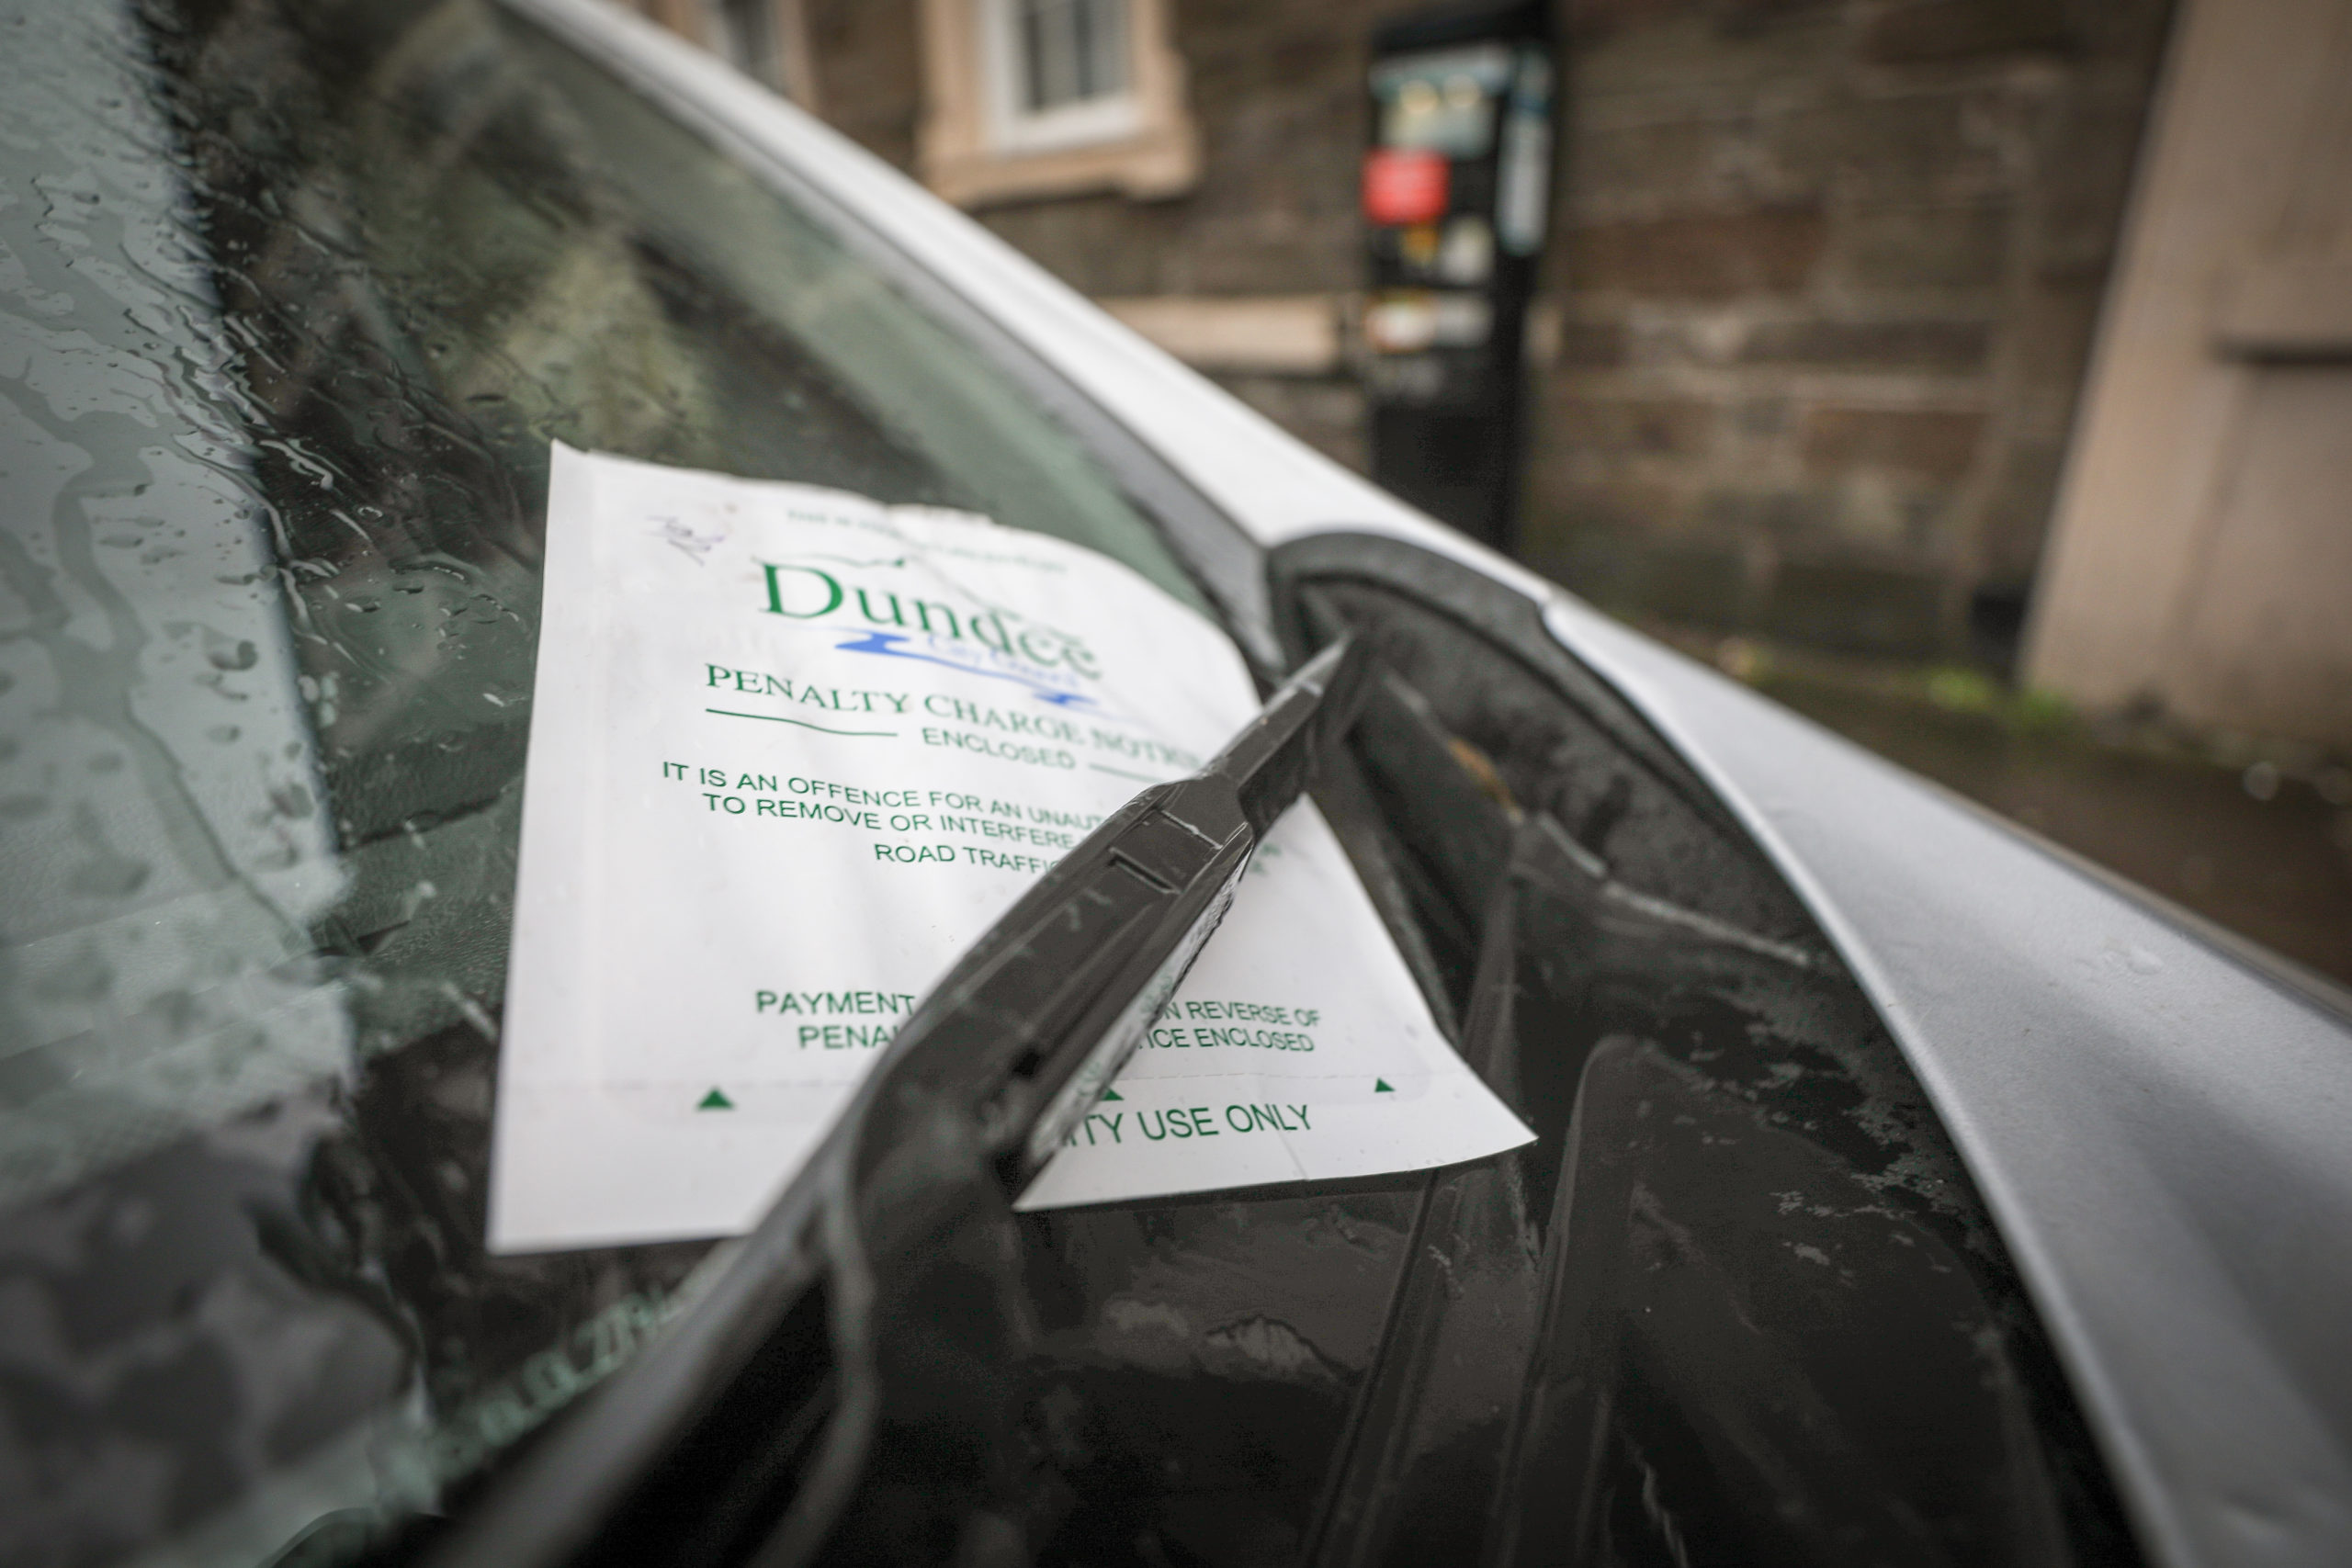 Illegal or inconsiderate parking in Dundee is to be targeted during lockdown.